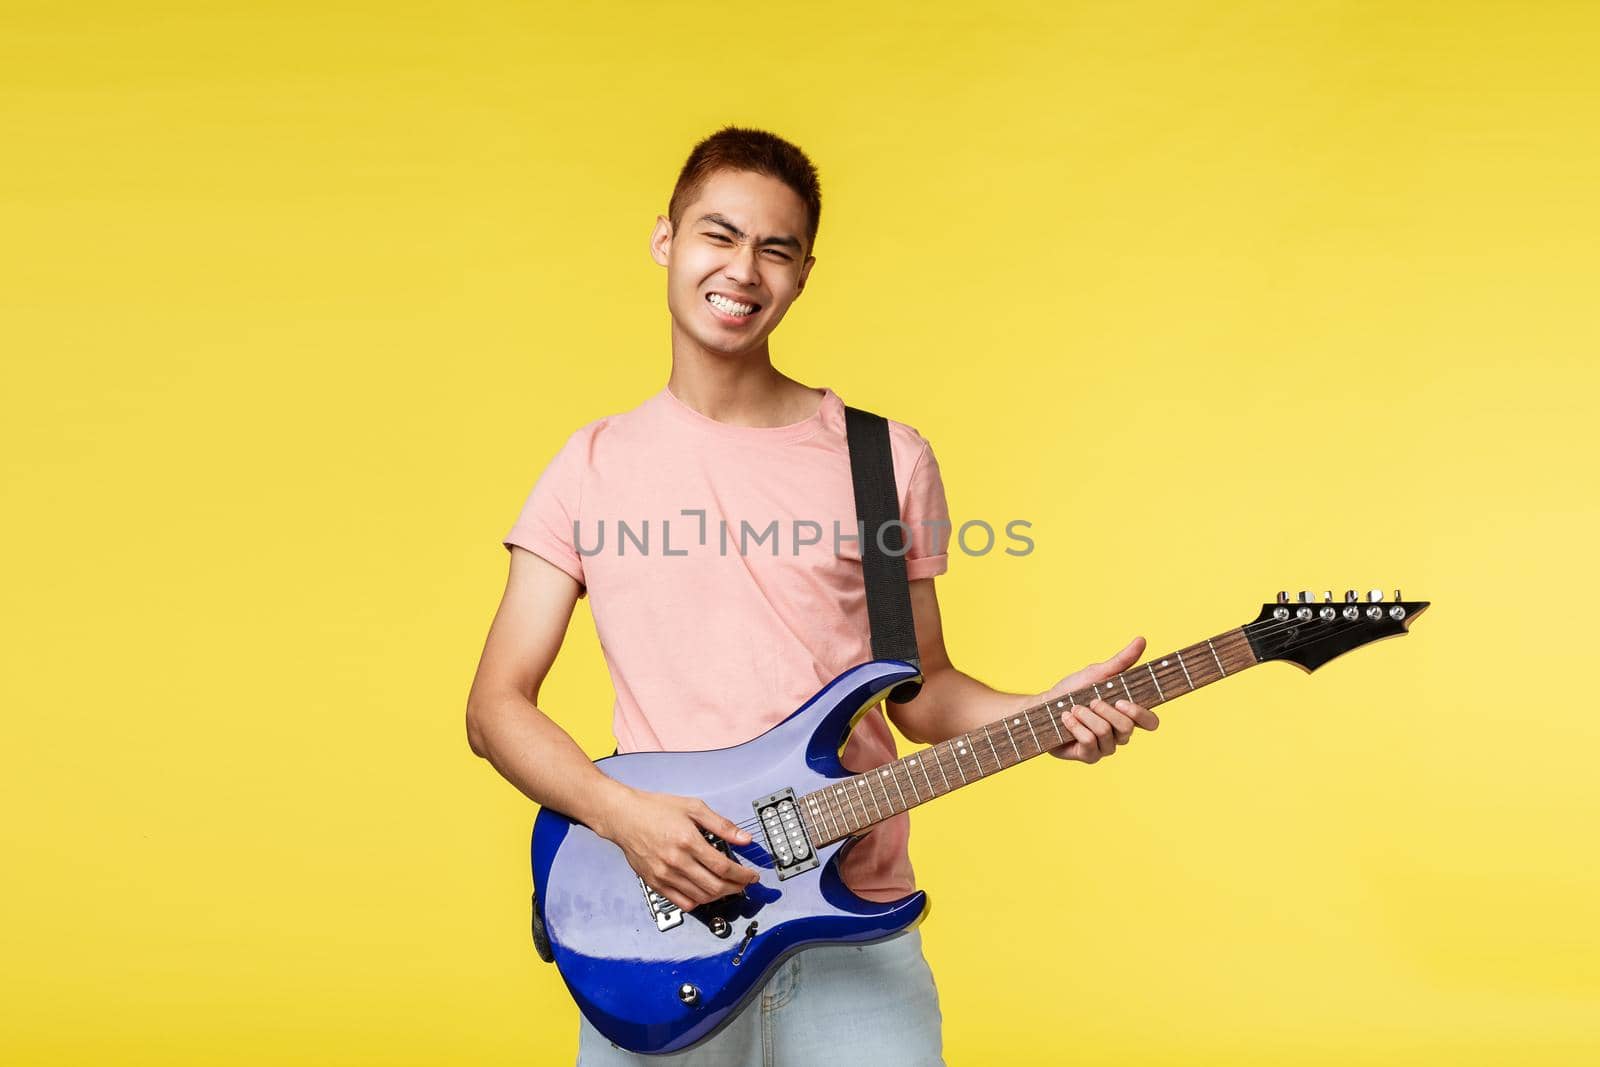 Lifestyle, leisure and youth concept. Lets jam. Carefree smiling asian guy playing in band, holding blue electric guitar, feel rock-n-roll start on stage, standing upbeat yellow background.